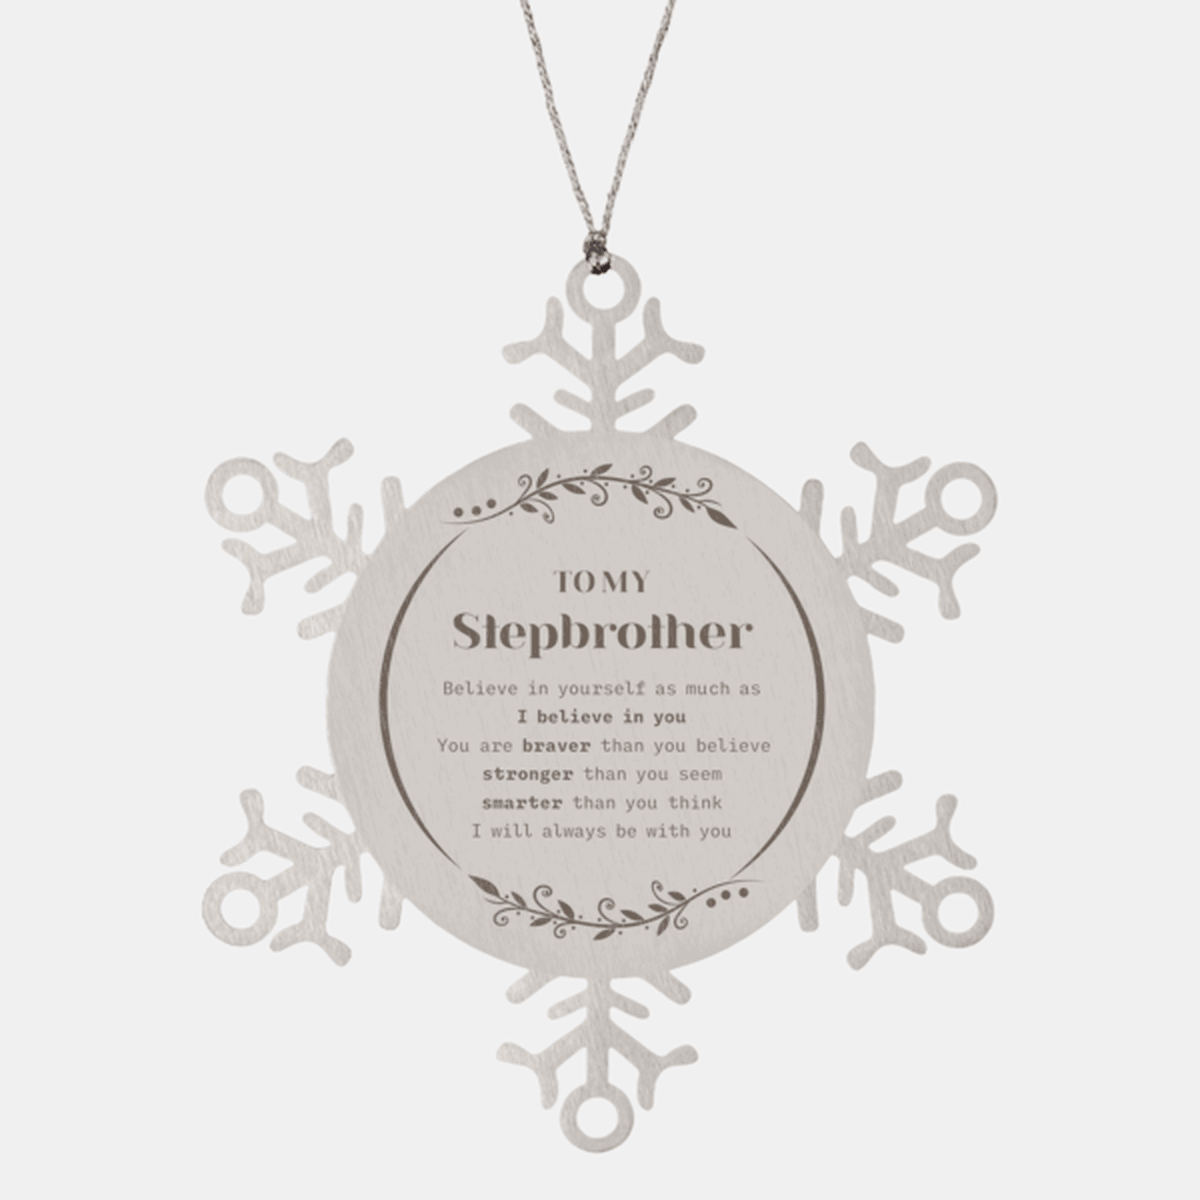 Stepbrother Snowflake Ornament Gifts, To My Stepbrother You are braver than you believe, stronger than you seem, Inspirational Gifts For Stepbrother Ornament, Birthday, Christmas Gifts For Stepbrother Men Women